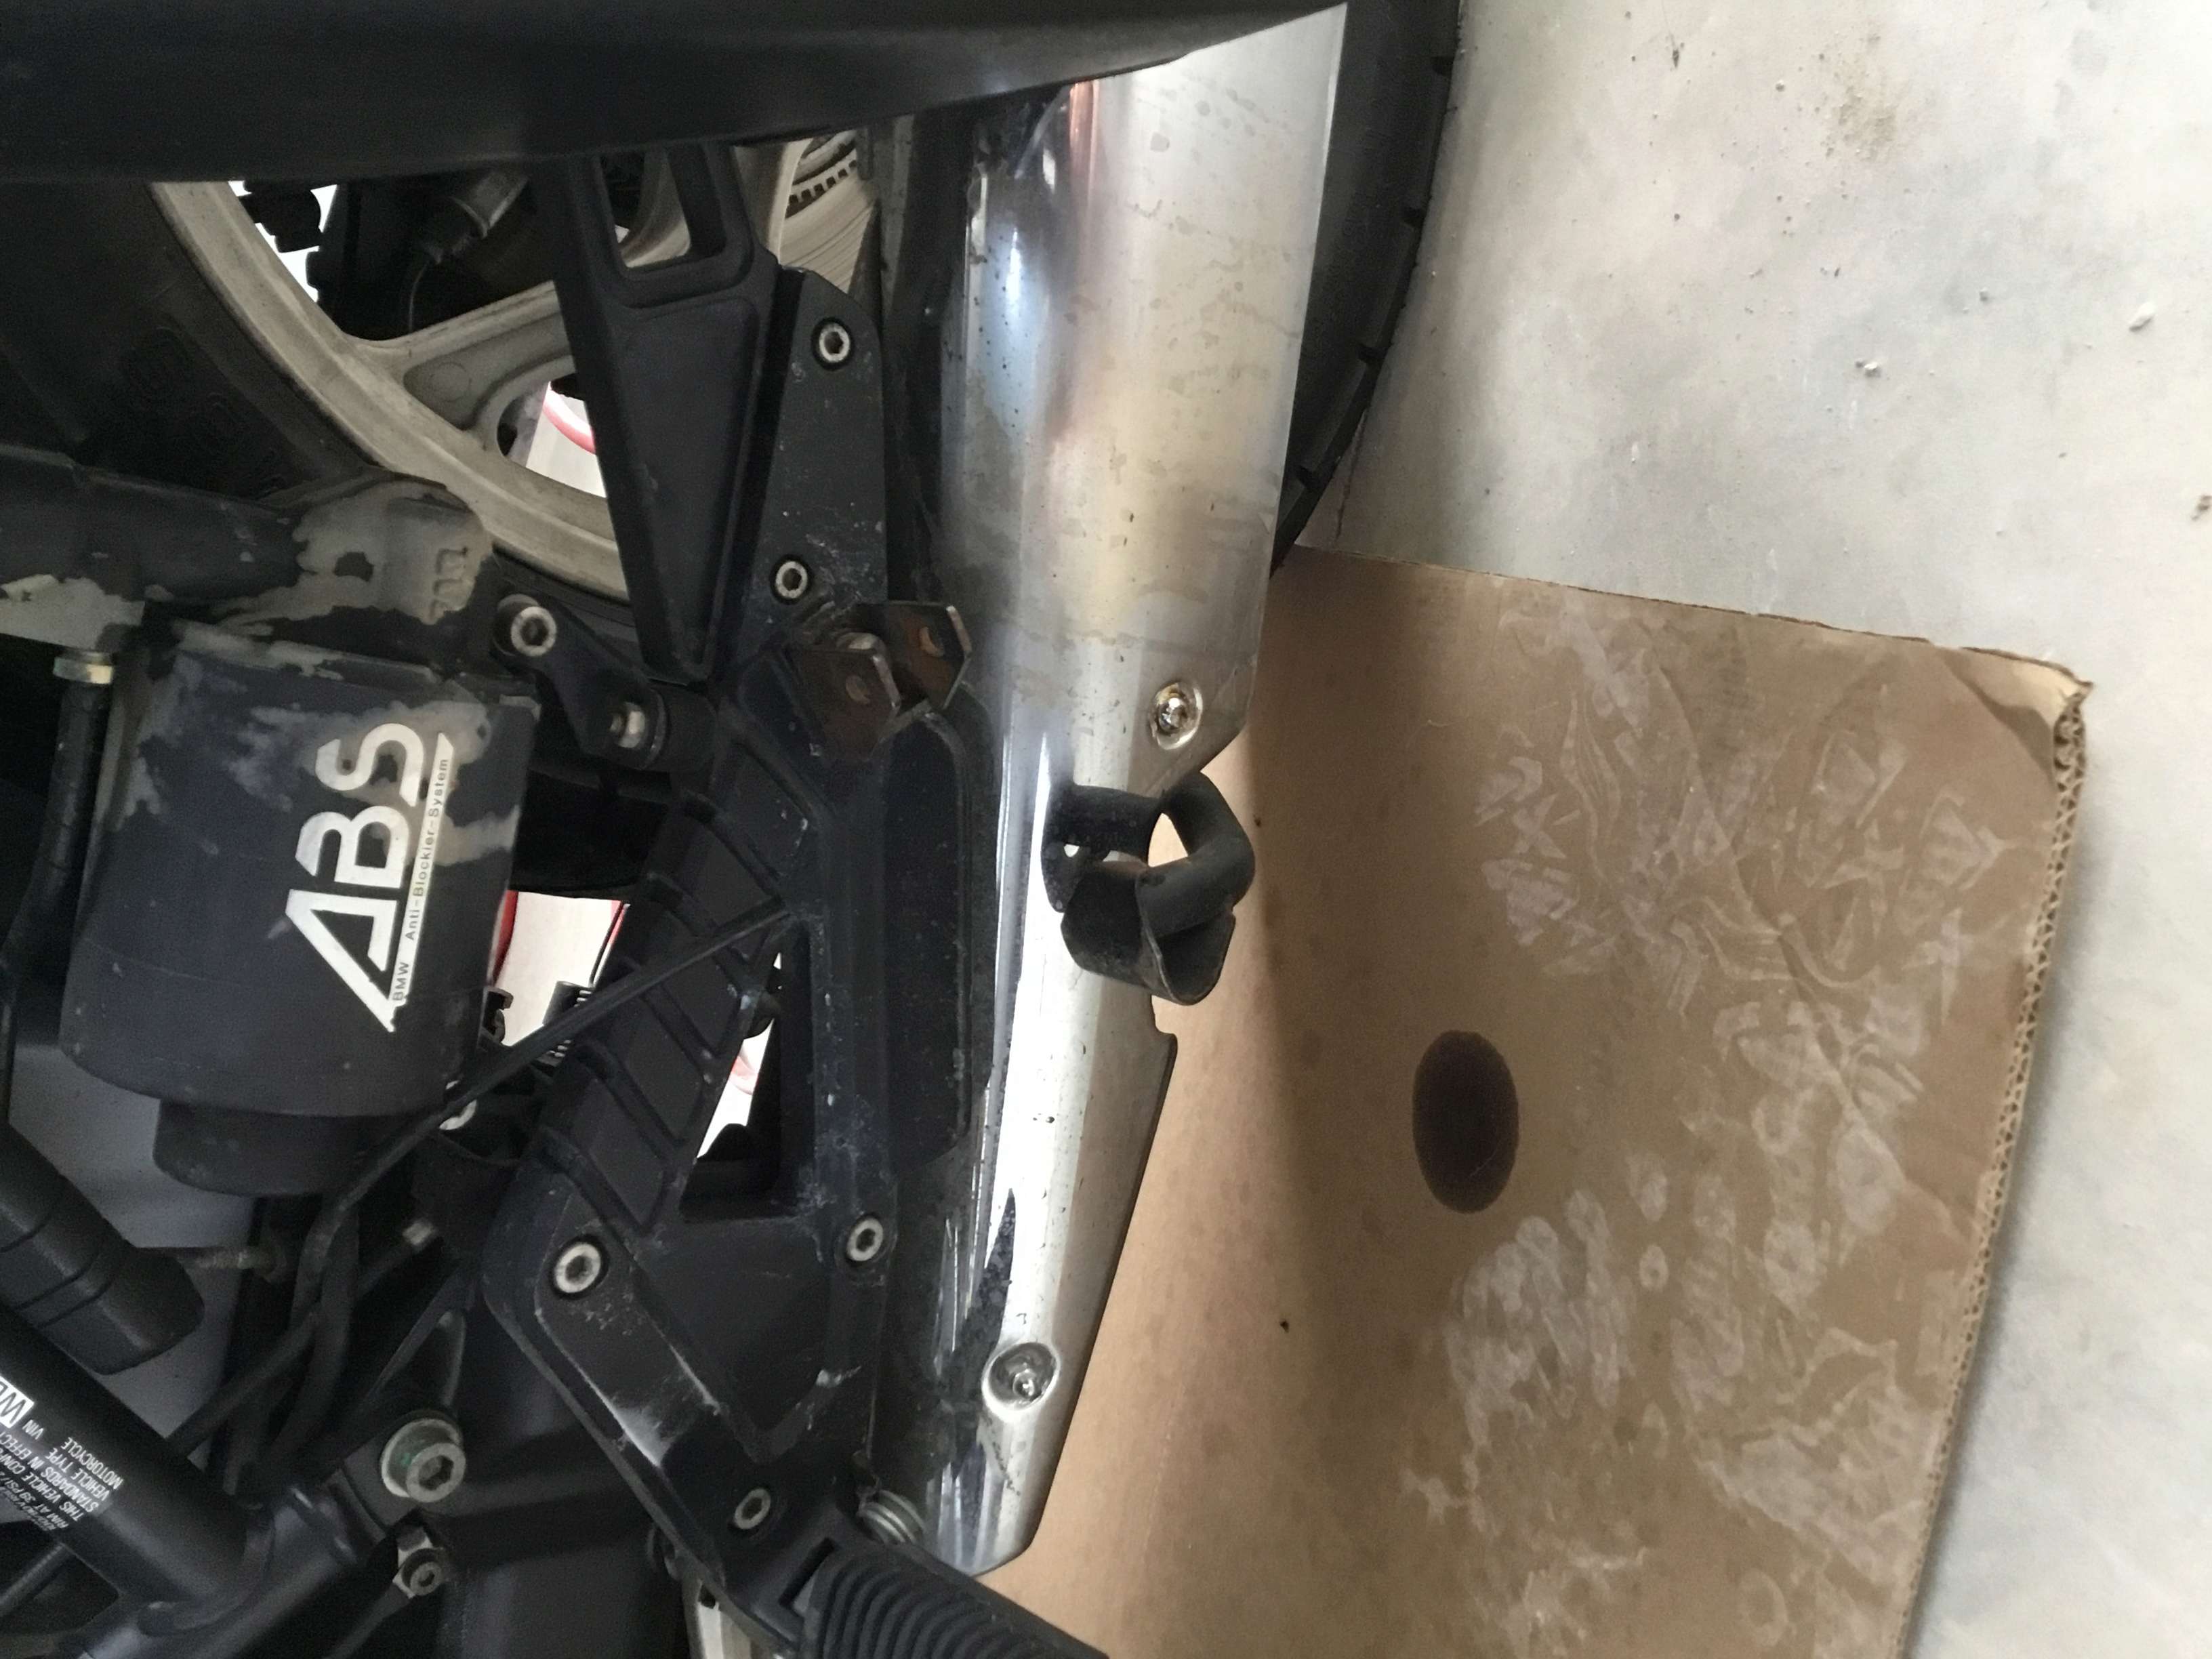 New to BMW and fixing bikes F5252610